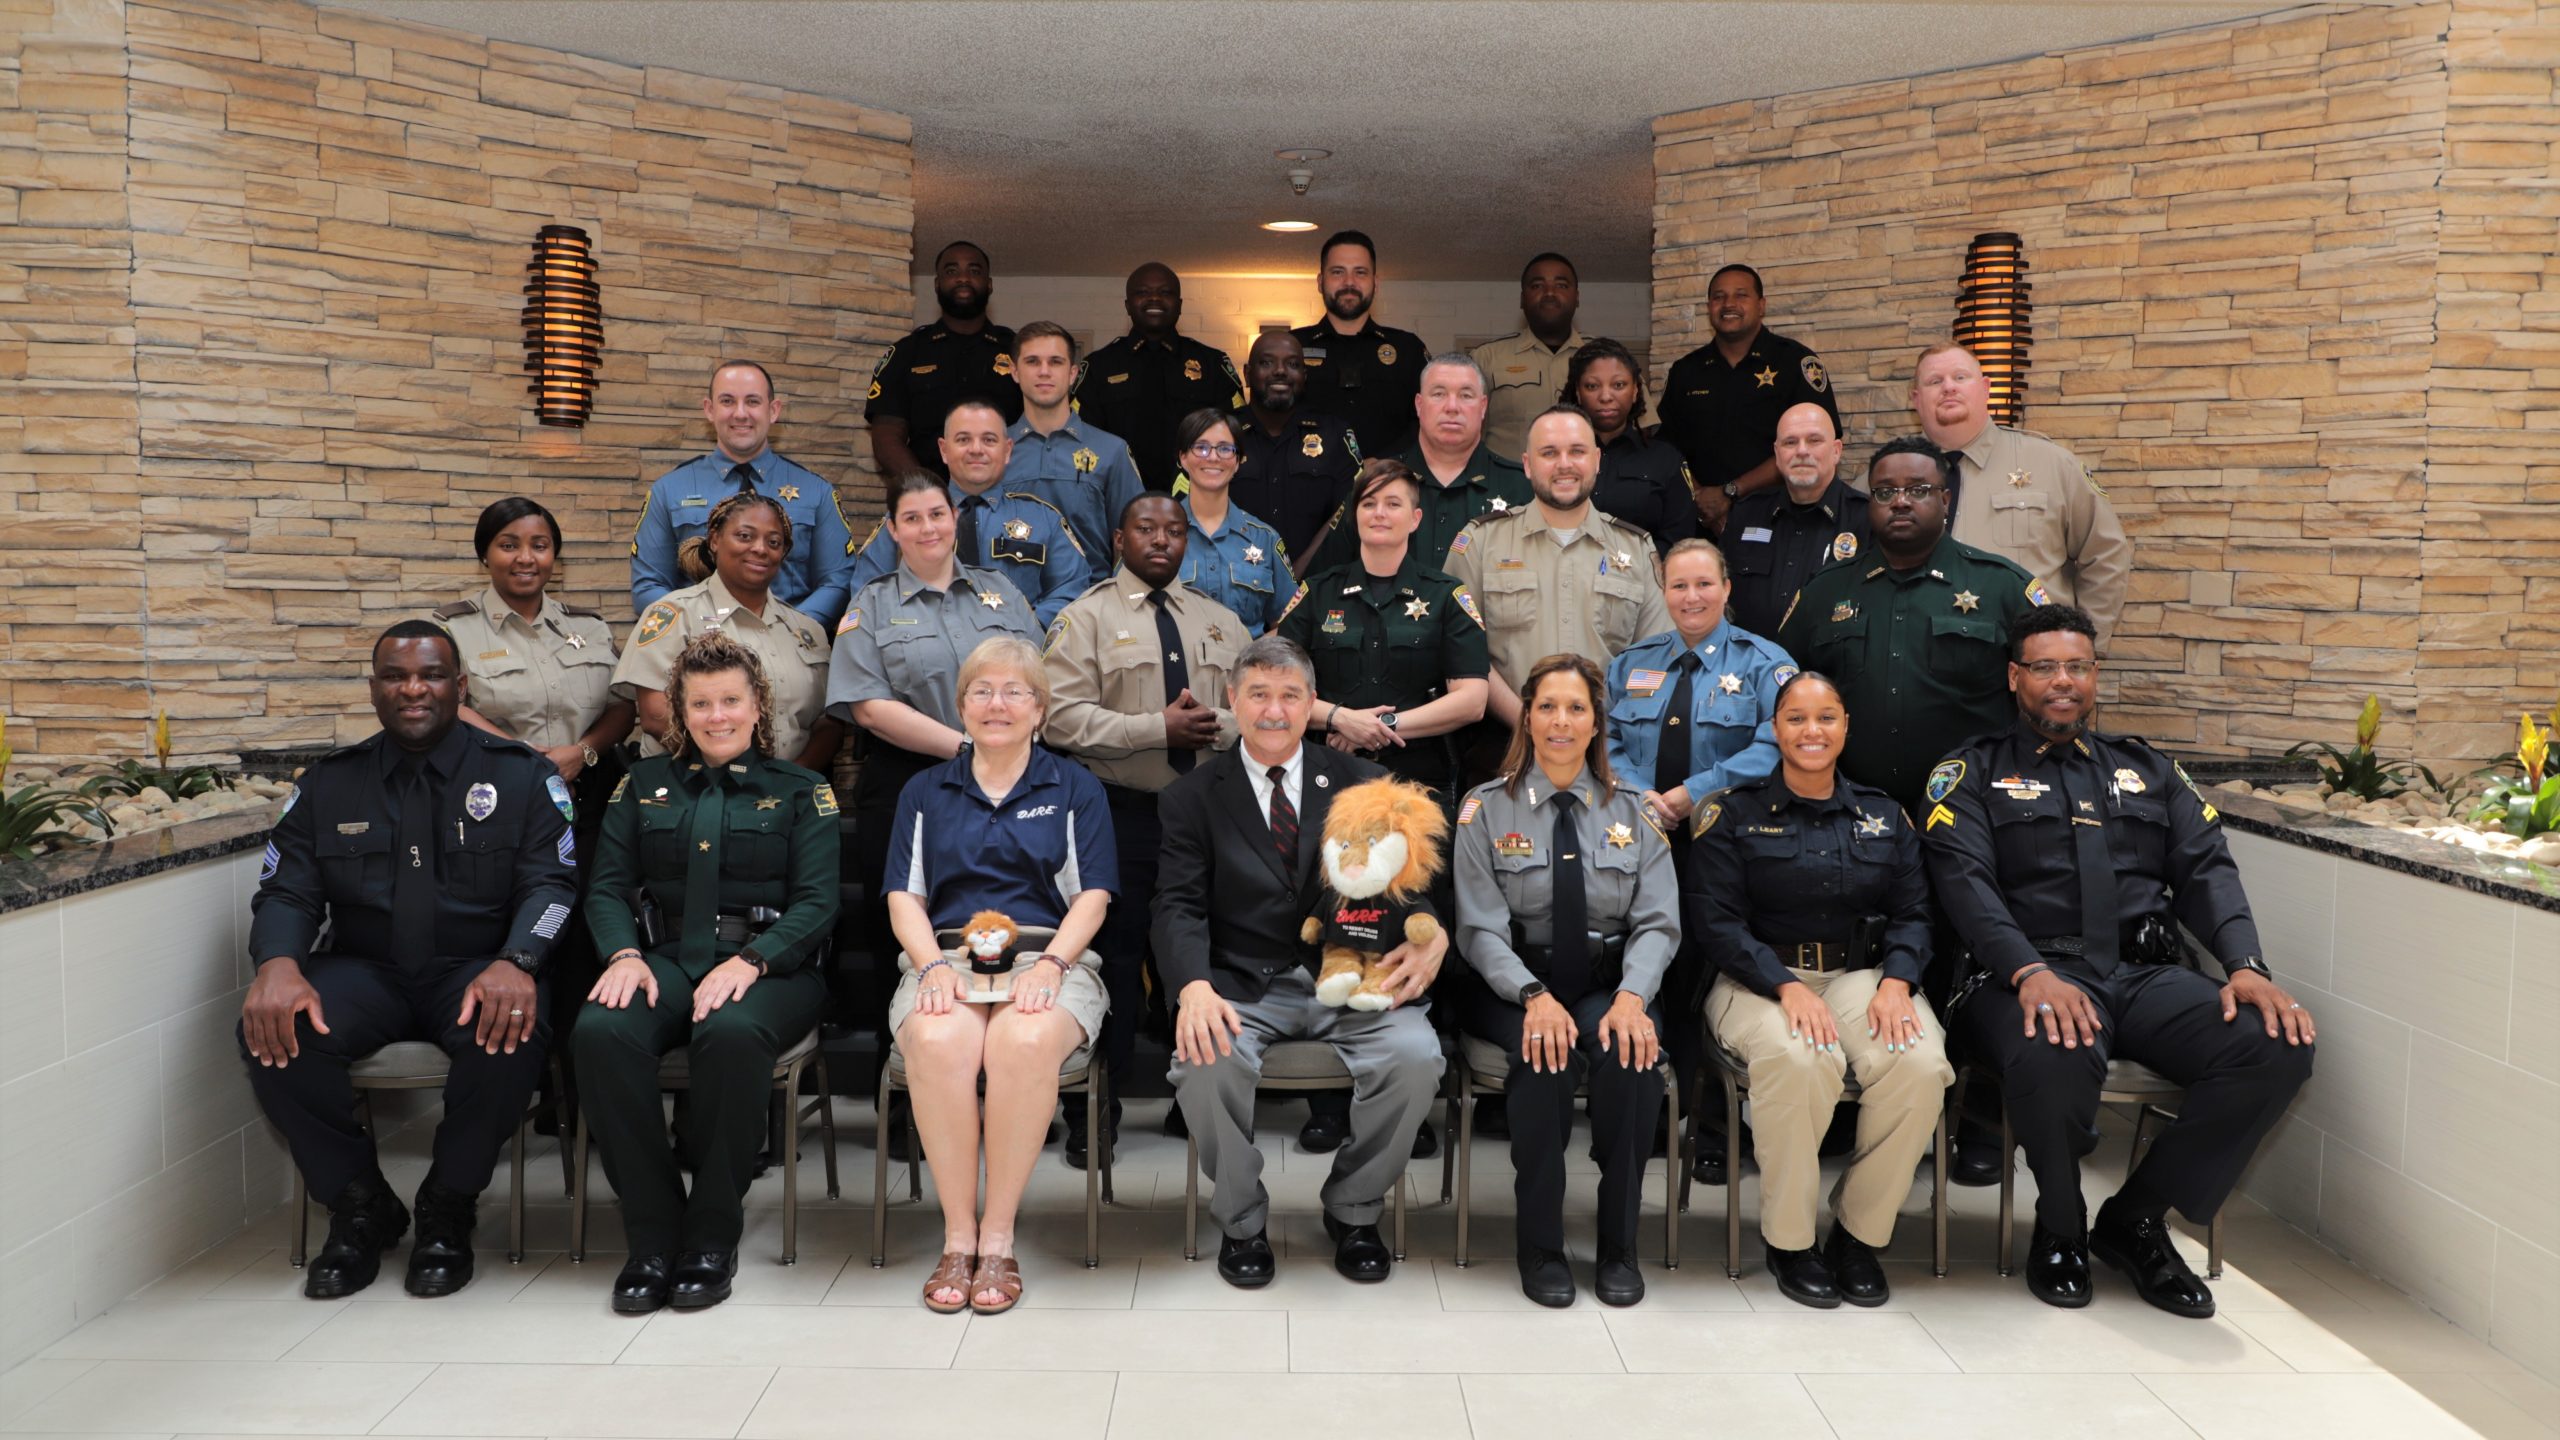 Class Photo from the D.A.R.E. Officer Training held on August 15 - 26, 2022 in Baton Rouge, LA